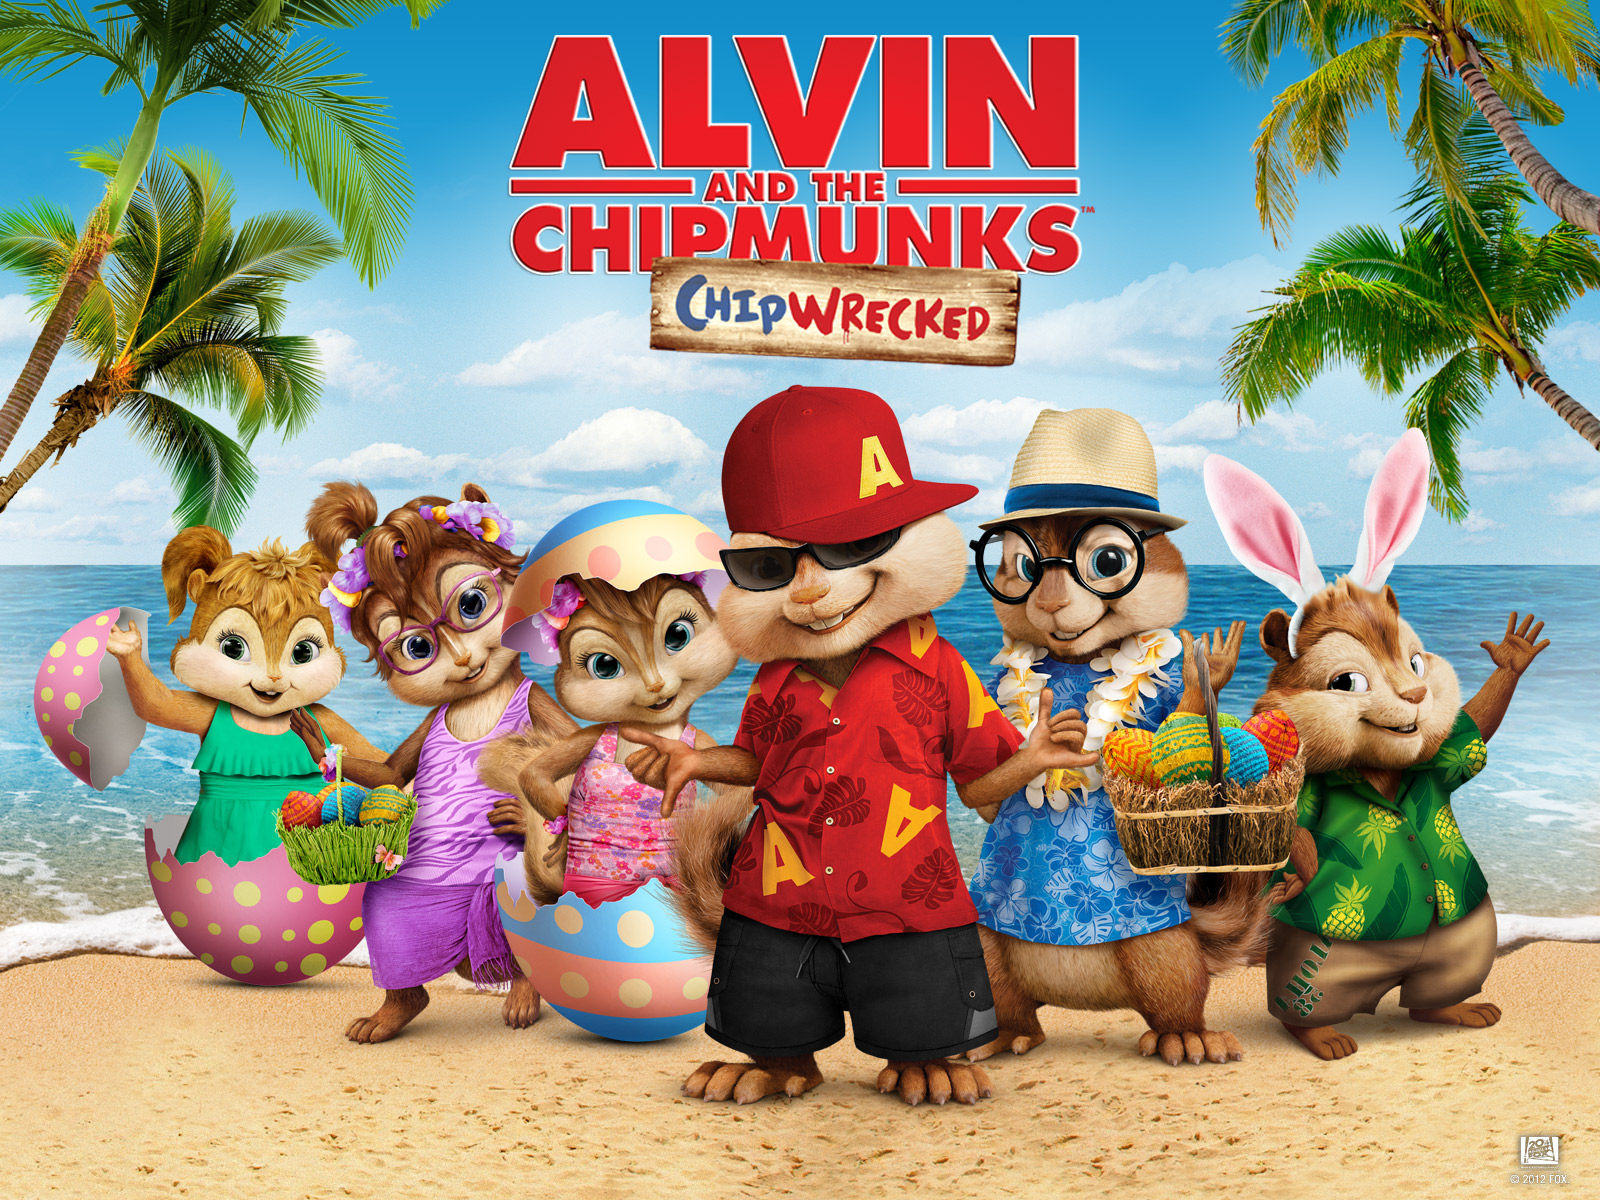 Alvin and the Chipmunks Wallpaper Alvin and the Chipmunks Wallpaper  Alvin  and the chipmunks Alvin and chipmunks movie Chipmunks